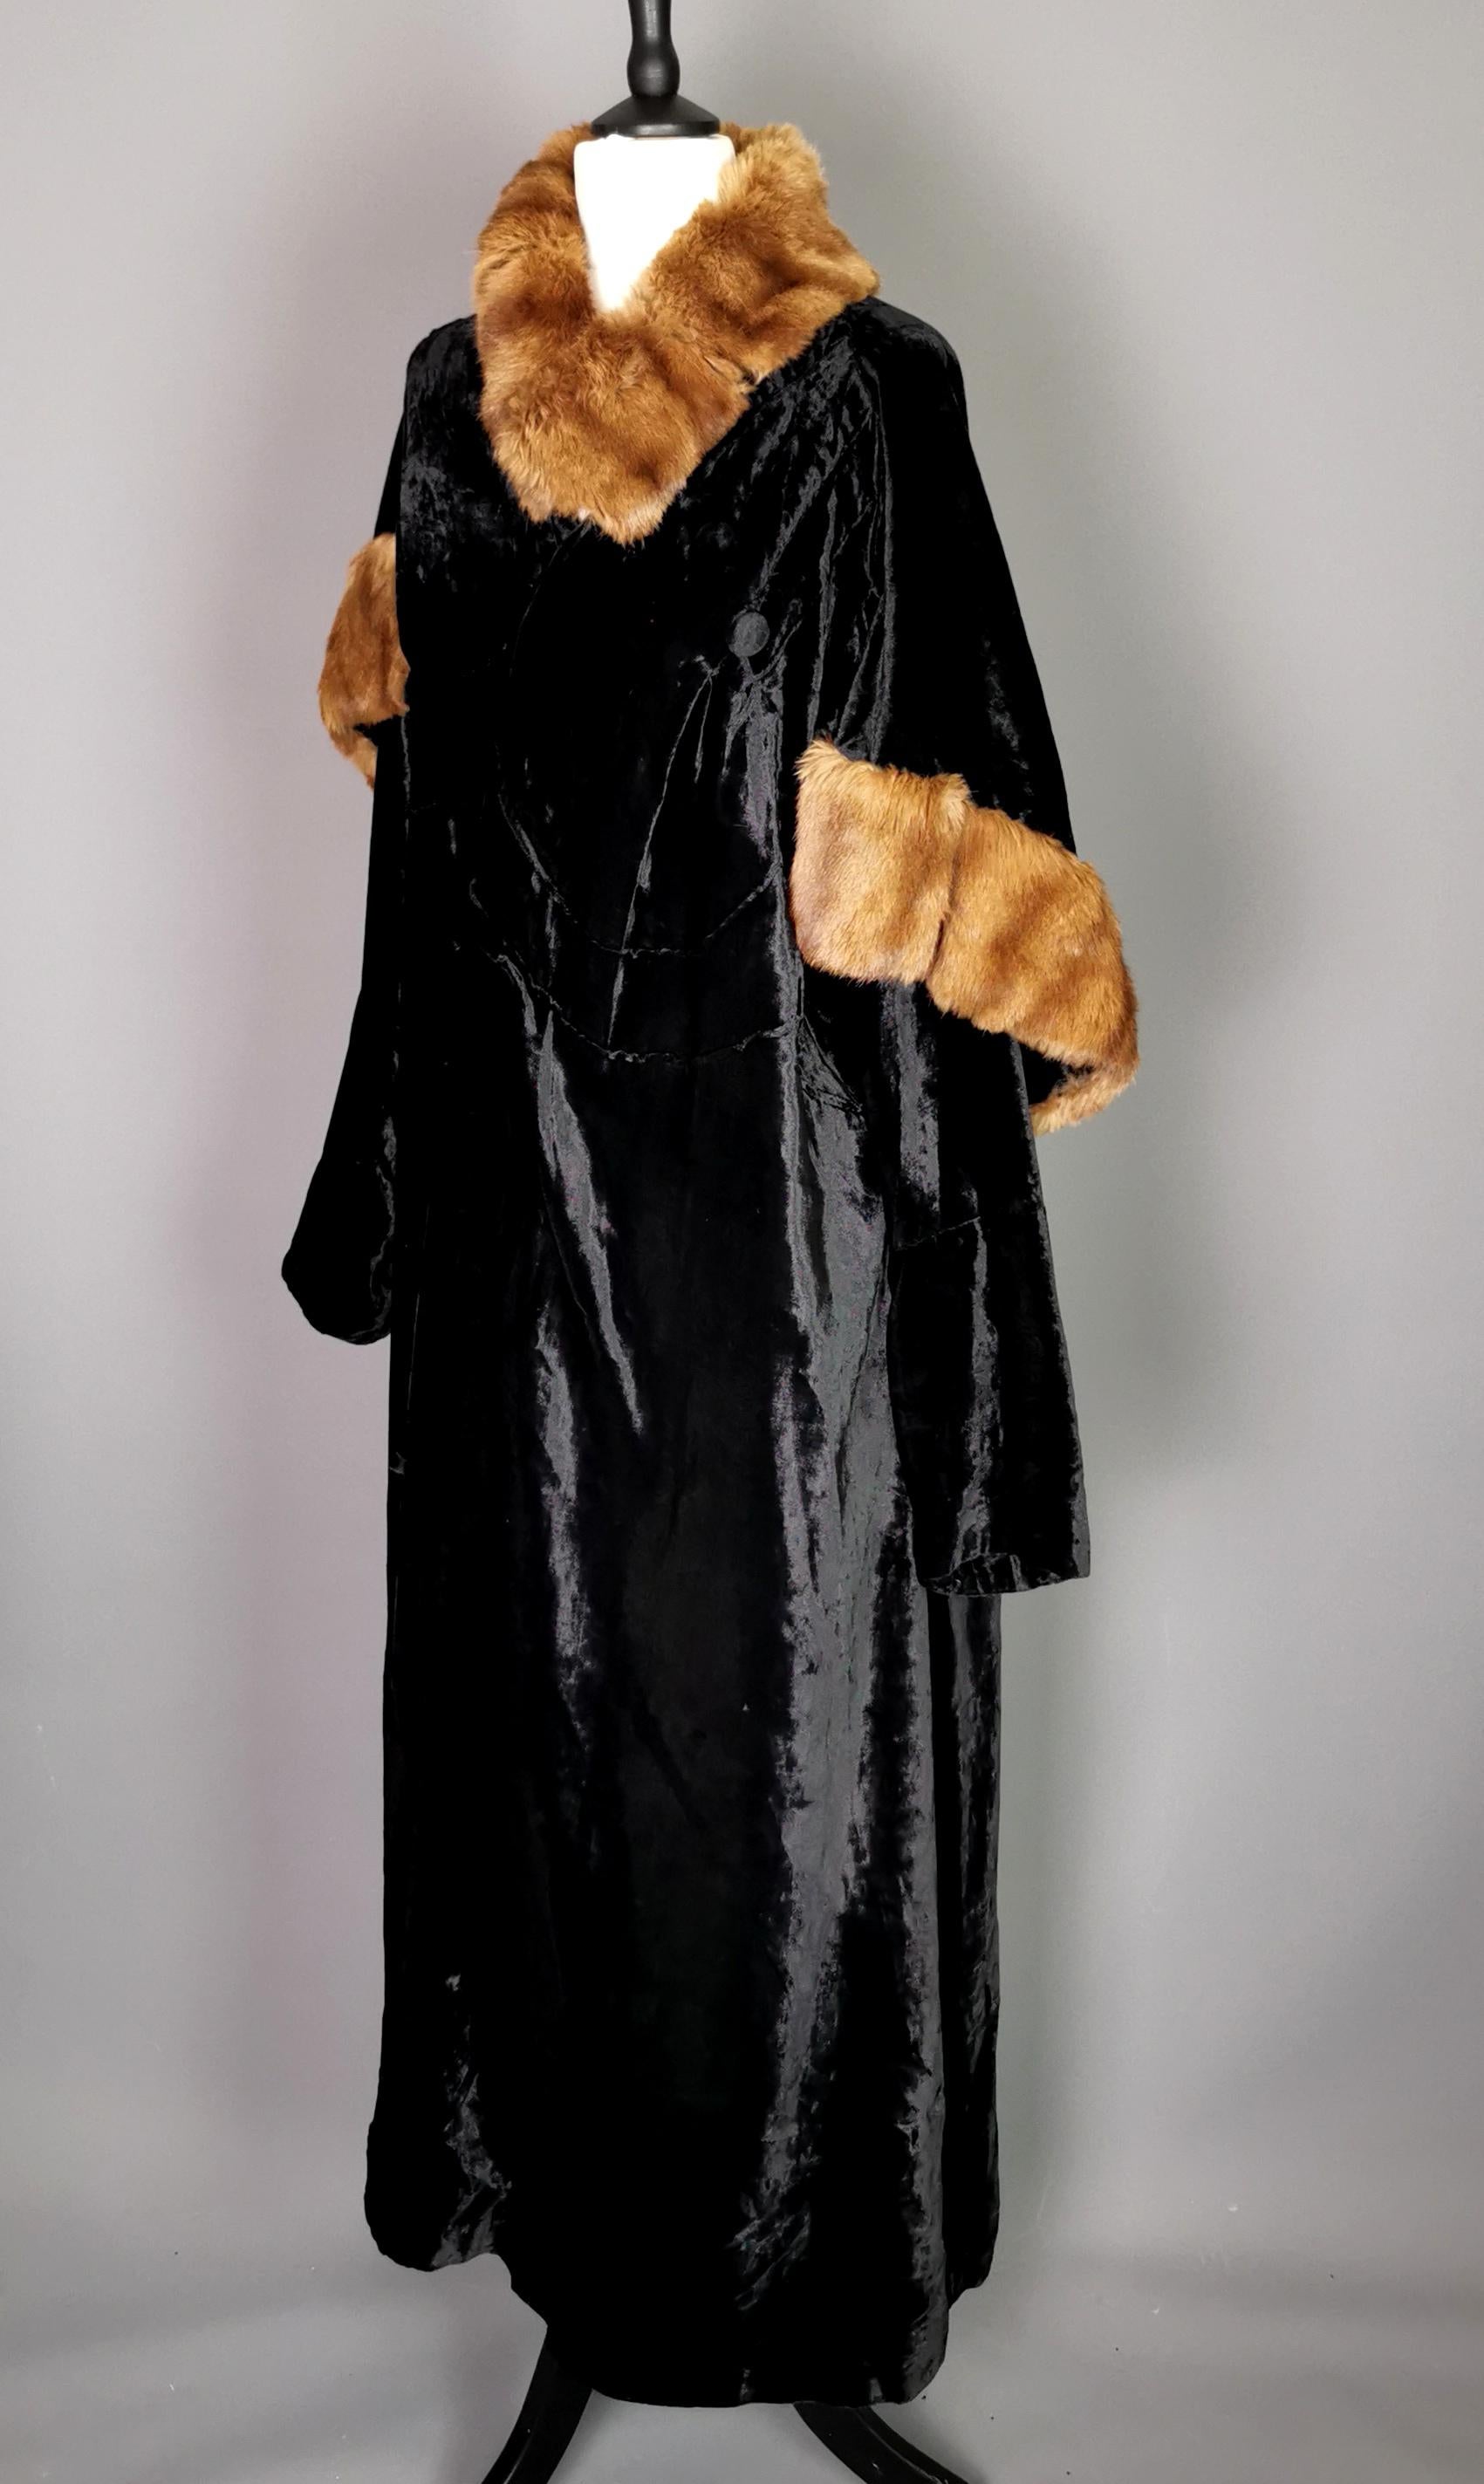 Stunning and sumptuous is the only way to describe this amazingly beautiful 1930's rich silk velvet opera coat.

This beauty is made from a superior quality silk velvet in an inky black shade, it is so soft to touch, fully lined in ivory satin with